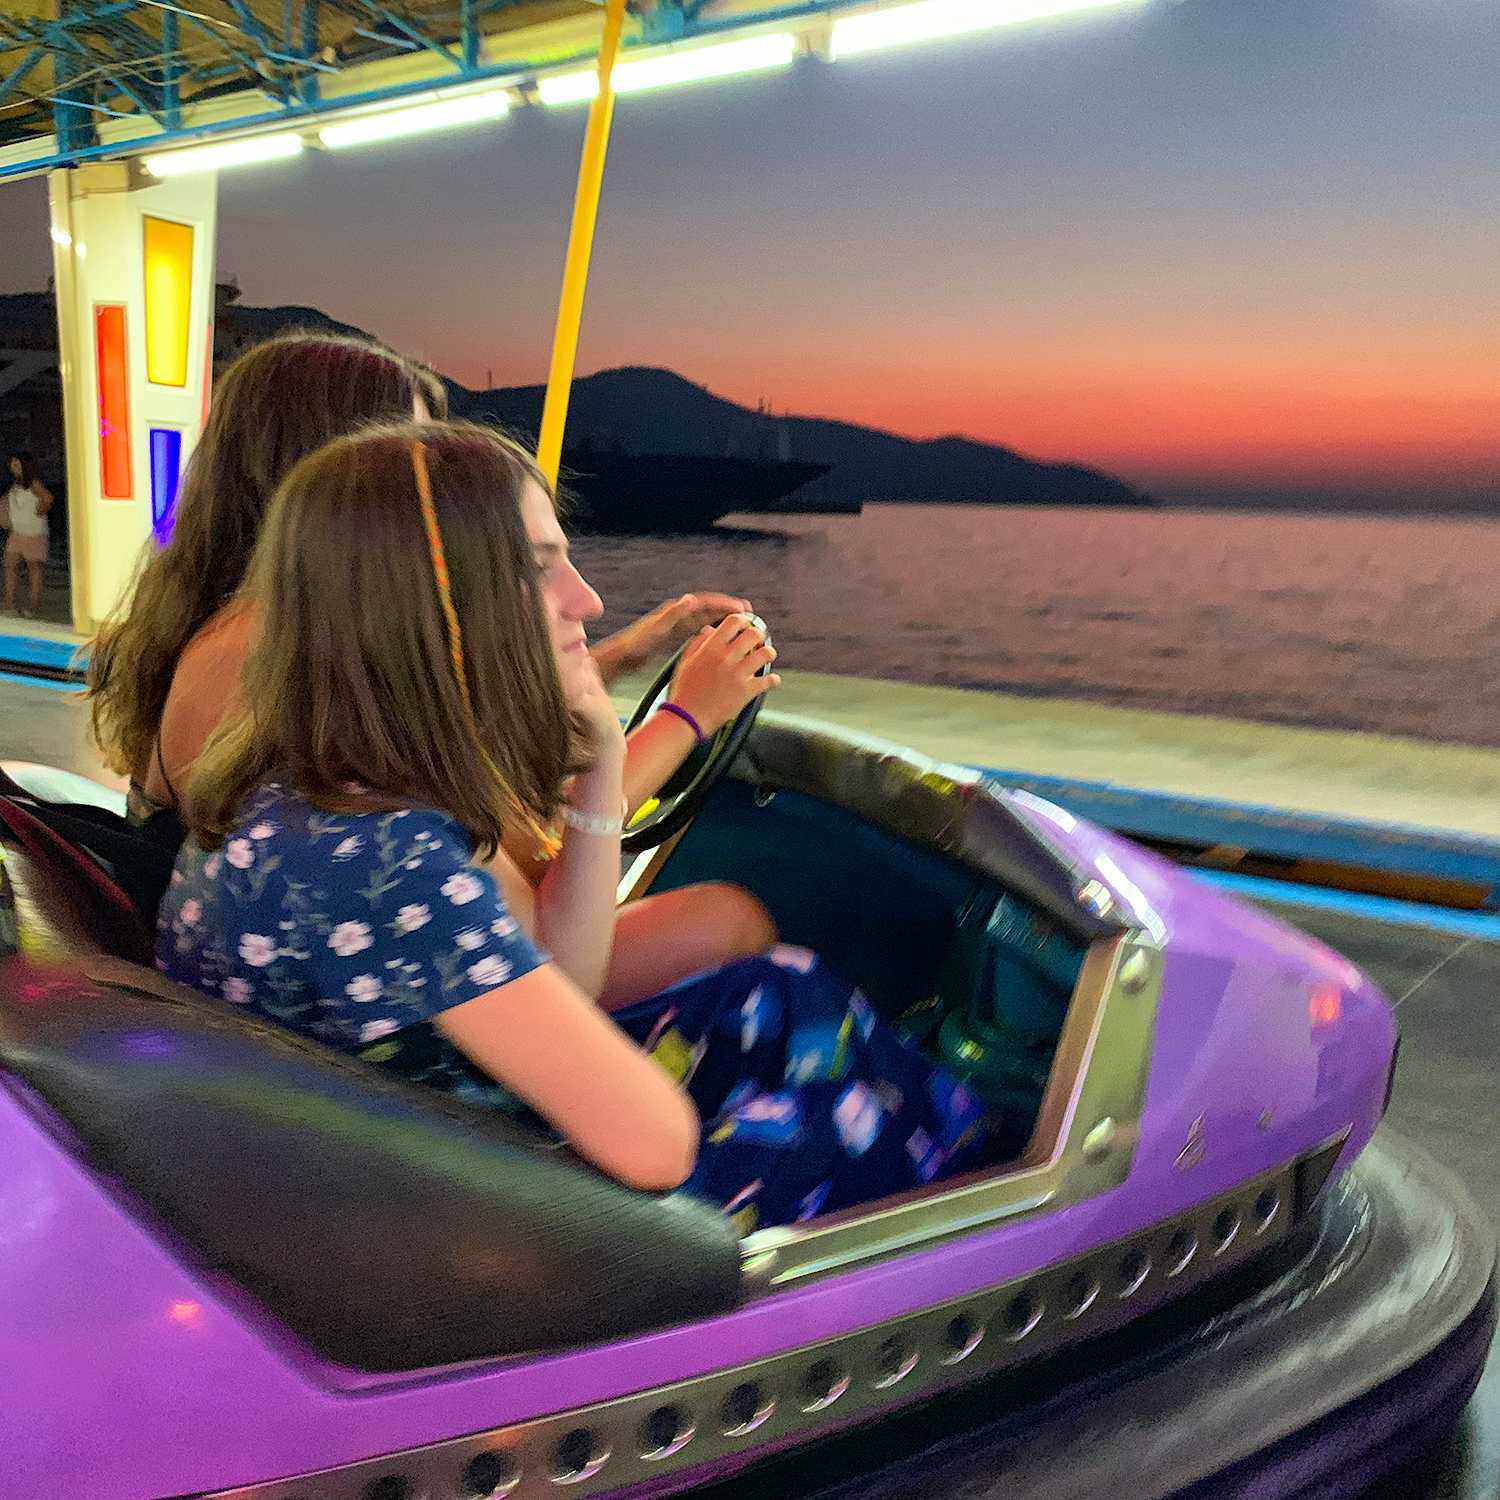 Photo Caption: Have fun after sunset with your kids at the Luna Park in Limenas